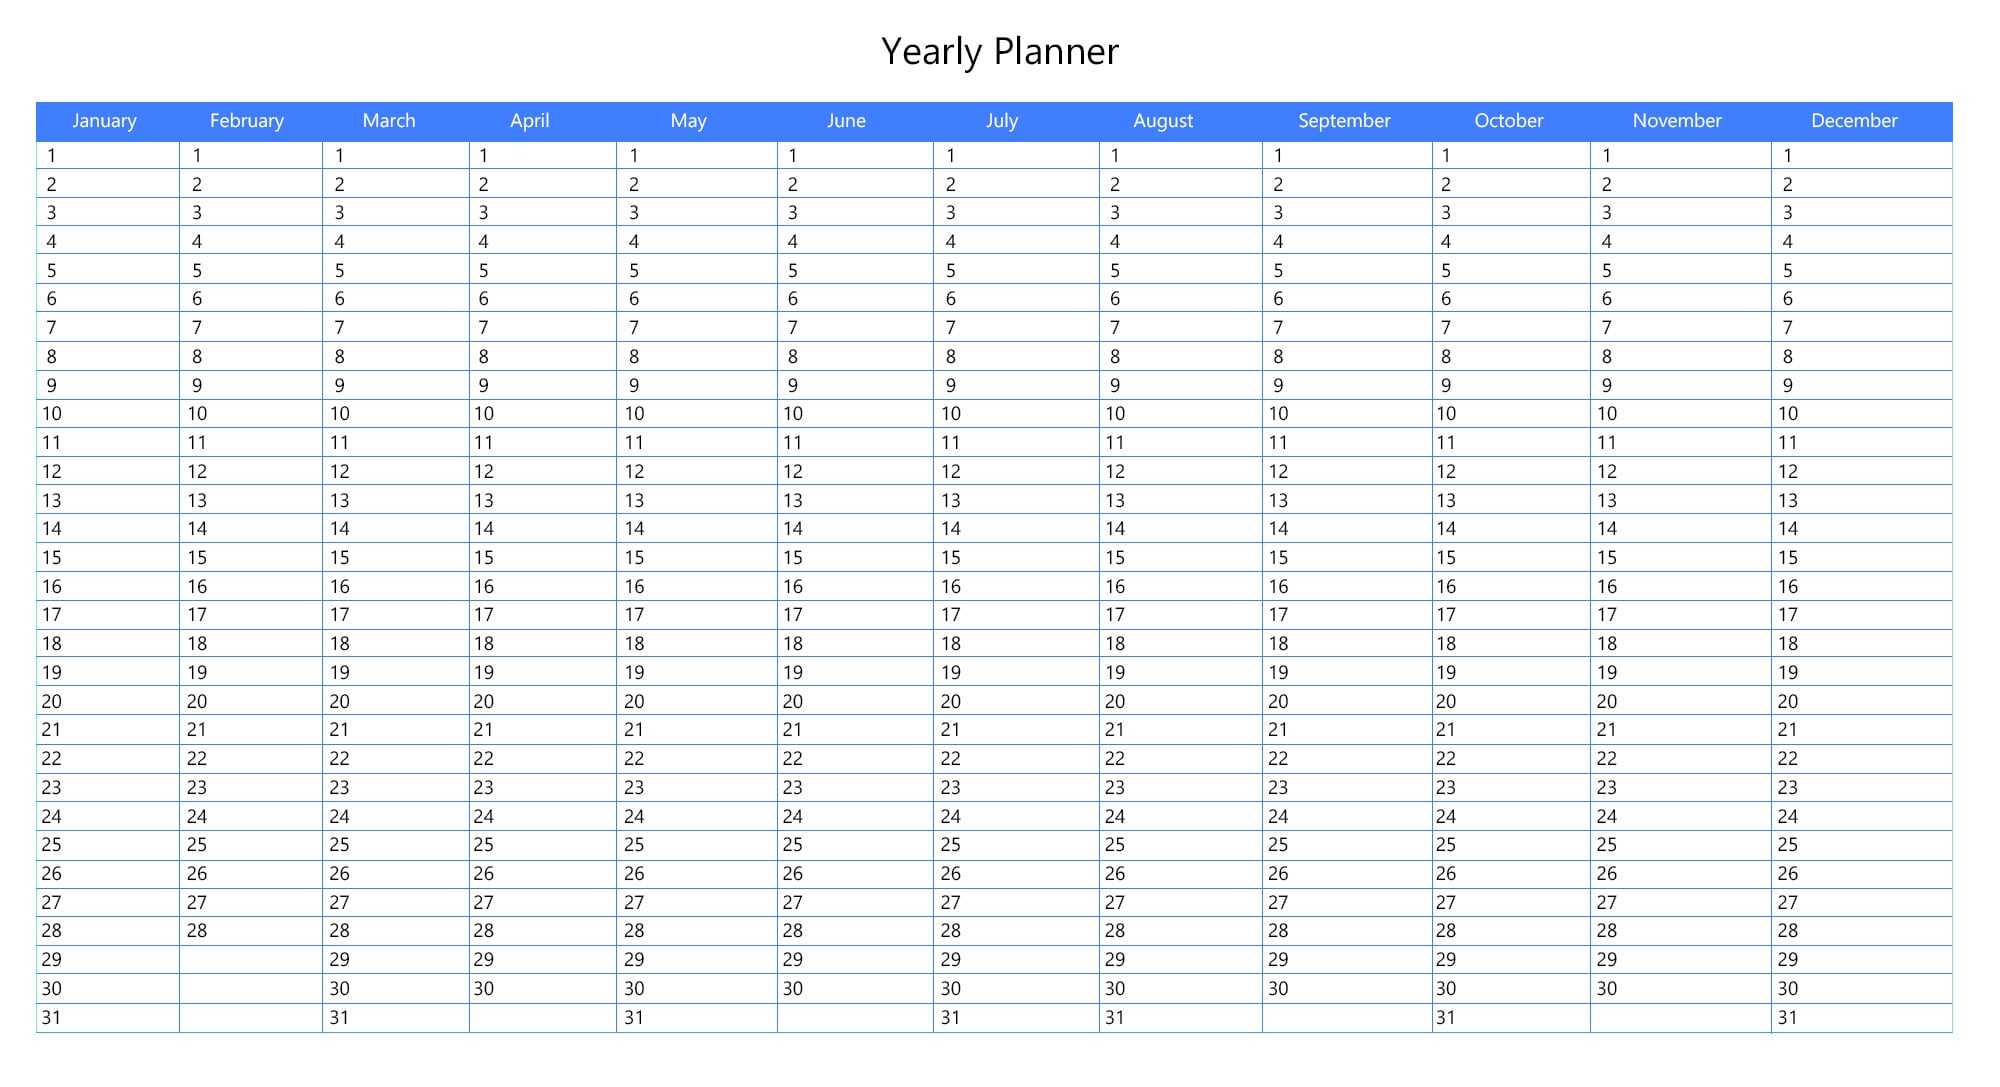 Yearly Planner Printable Free Printable Templates